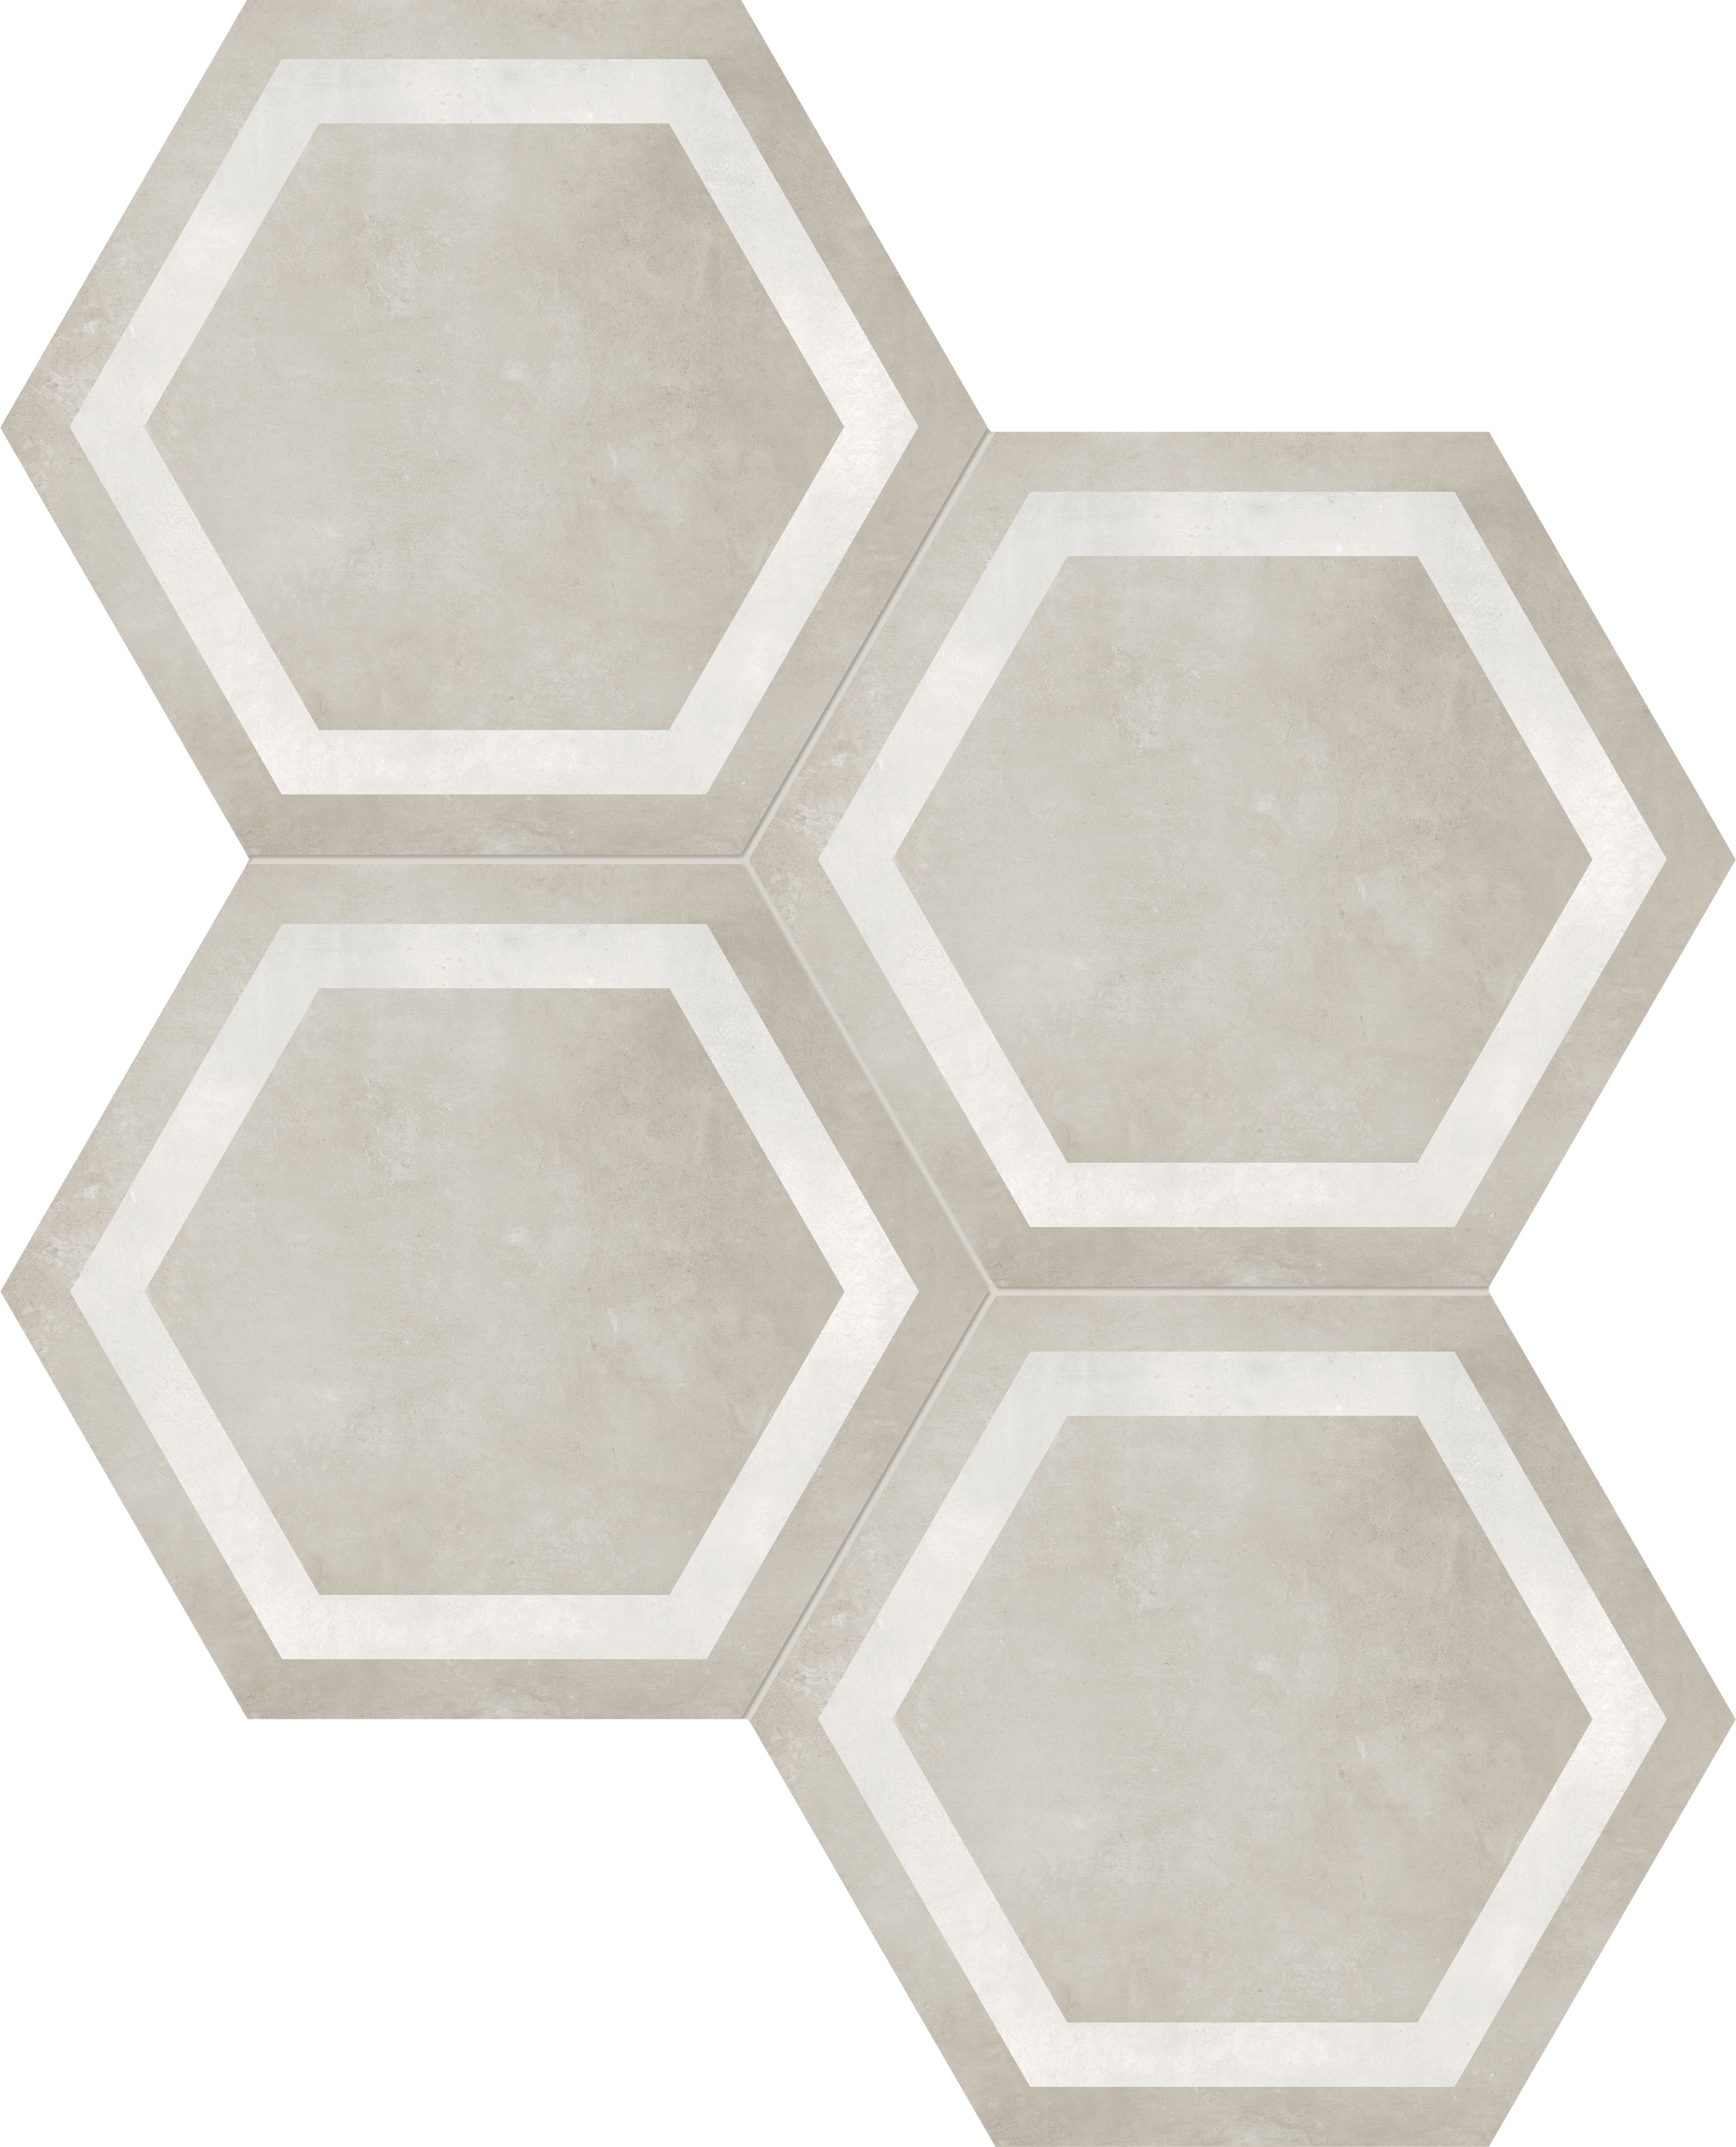 sand print pattern glazed porcelain deco tile from form anatolia collection distributed by surface group international matte finish pressed edge 7-inch hexagon shape